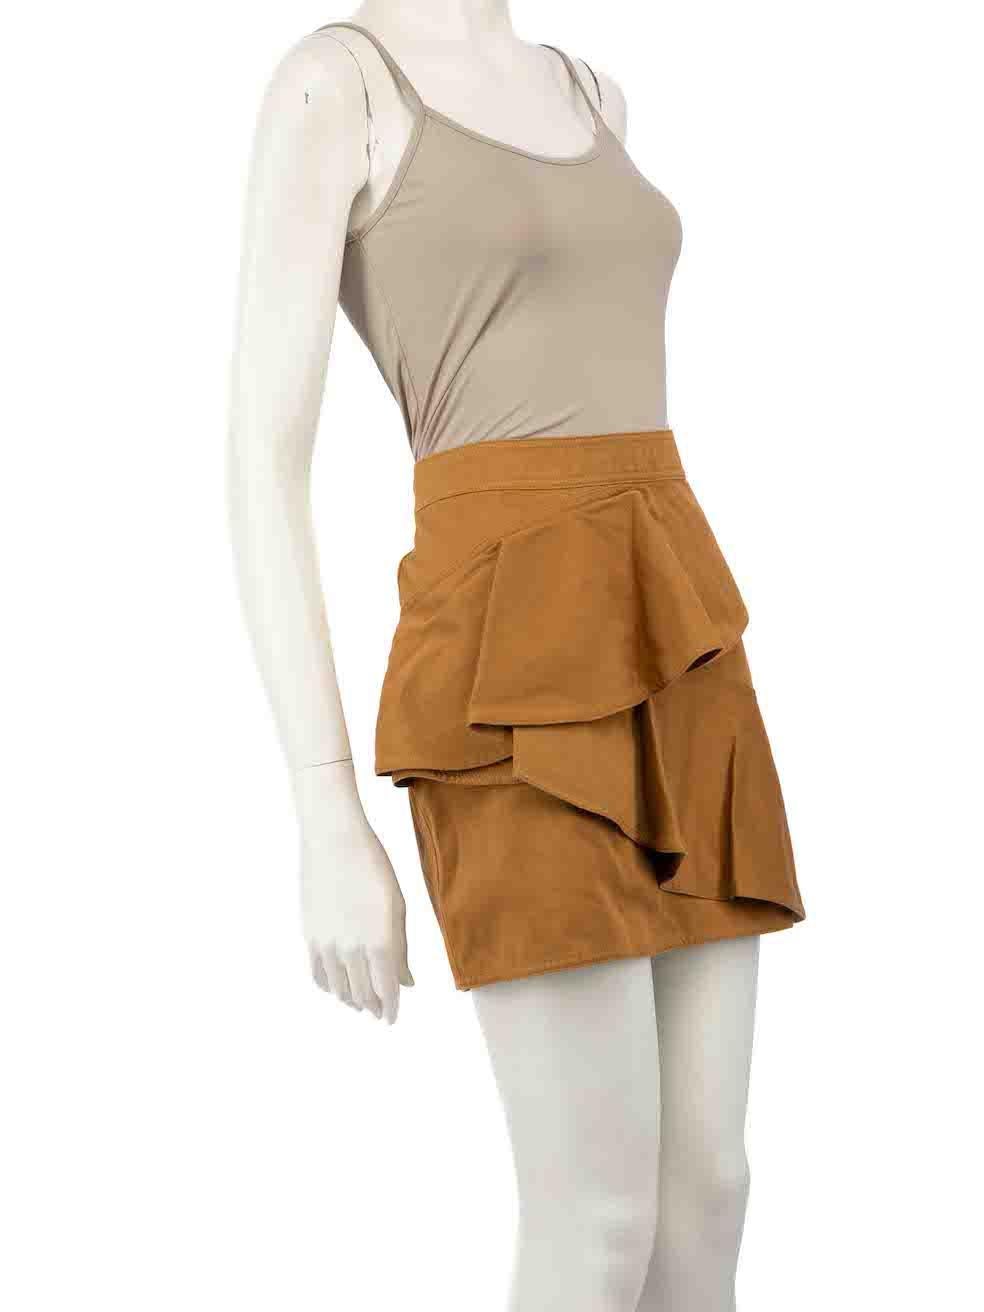 CONDITION is Very good. Hardly any visible wear to skirt is evident on this used Isabel Marant Étoile designer resale item.
 
 
 
 Details
 
 
 Brown
 
 Cotton
 
 Skirt
 
 Ruffle trim
 
 Mini
 
 Back zip fastening
 
 
 
 
 
 Made in Tunisia
 
 
 
